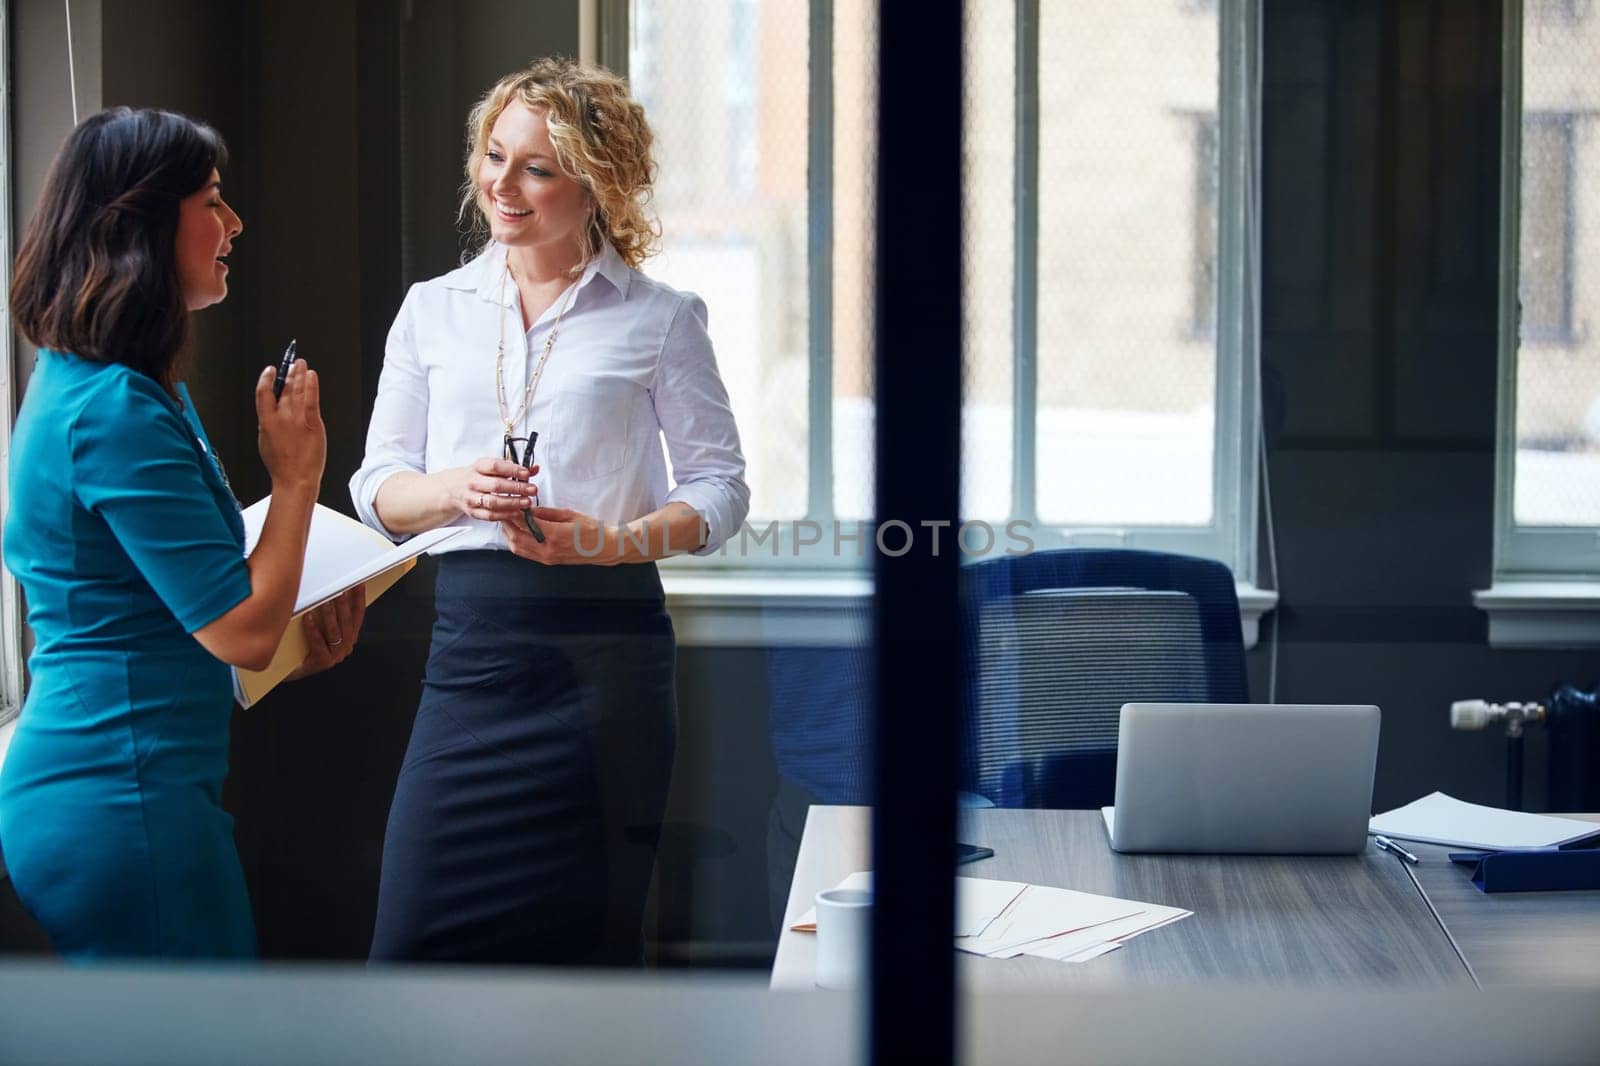 Their communication skills are superb. two businesswomen having a discussion in an office